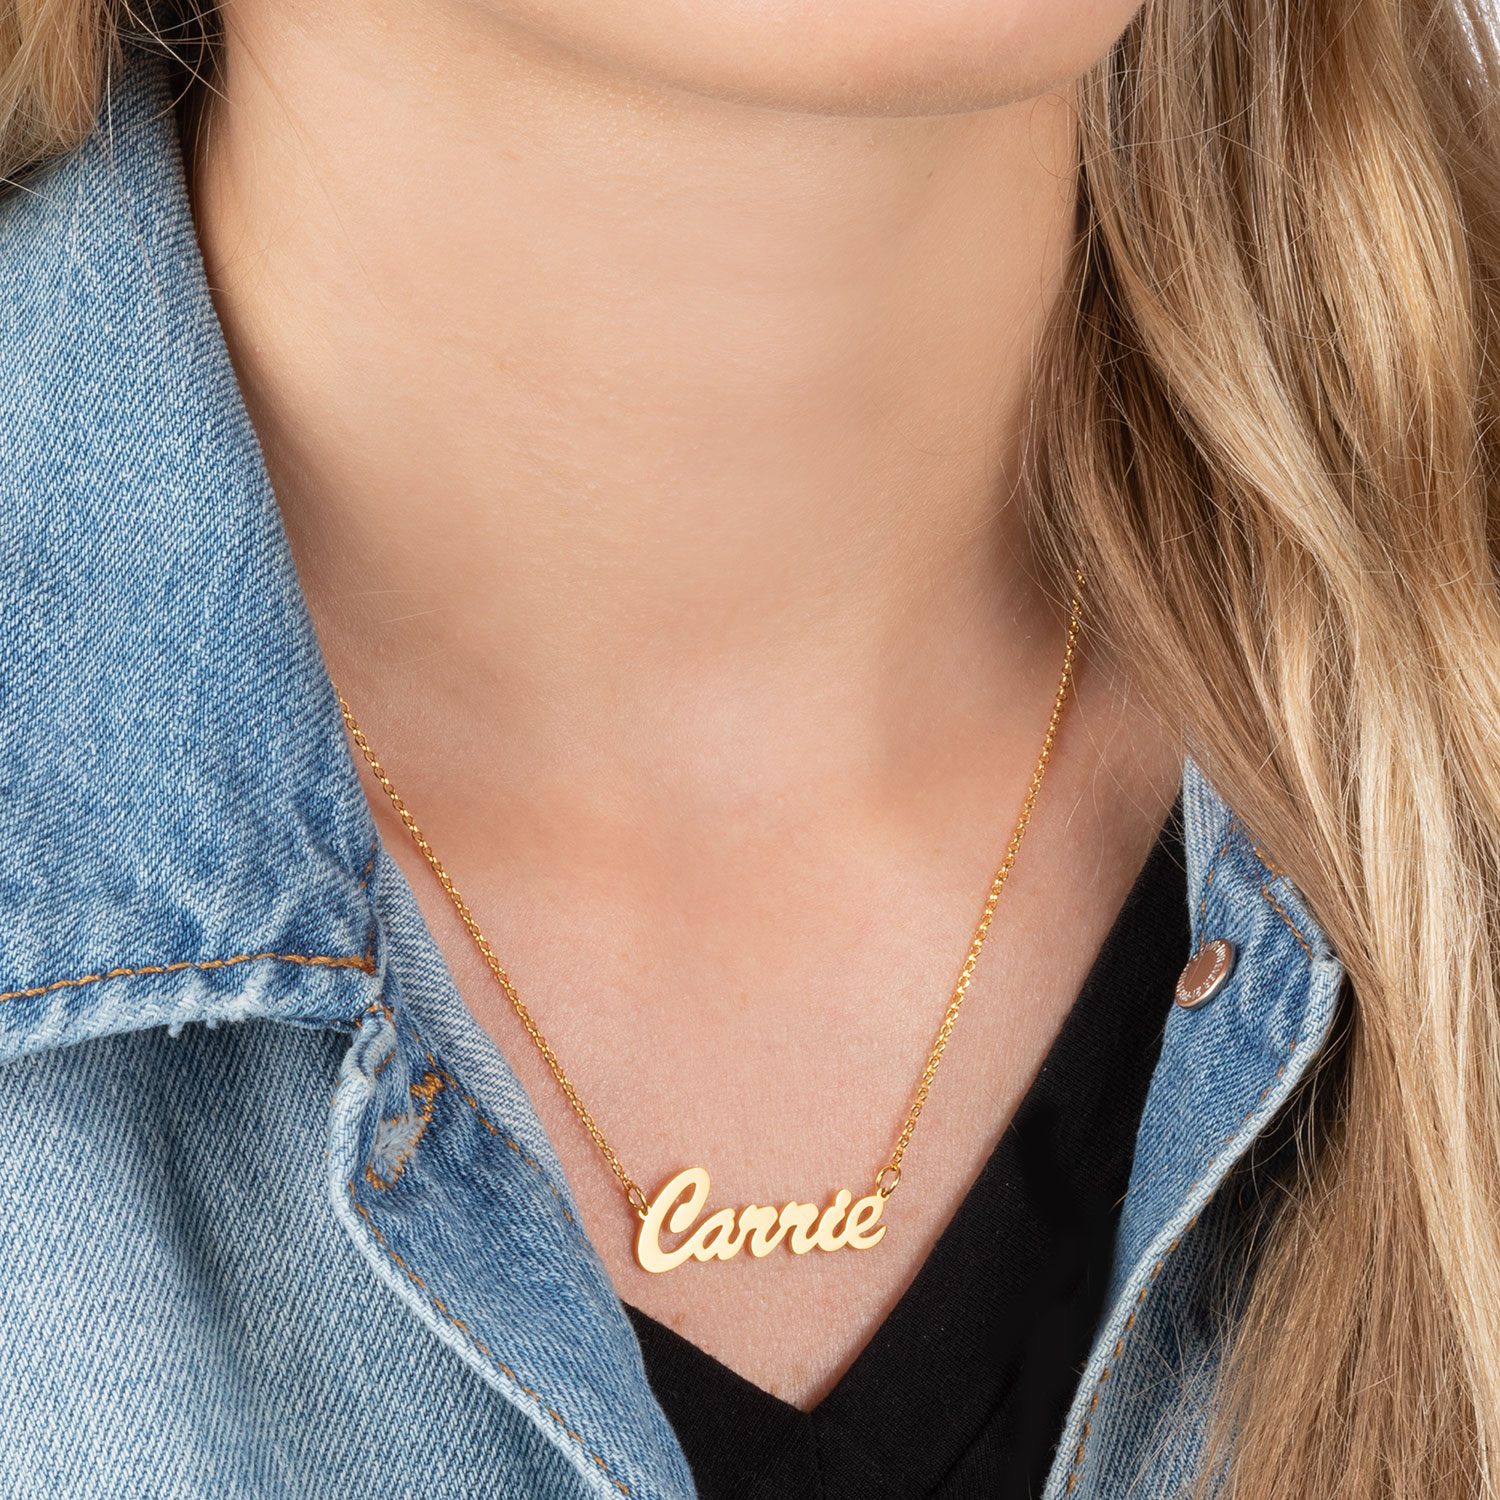 Personalized Planet Women's 14kt Gold-Plated Sterling Hollywood Nameplate Necklace,18" - image 4 of 5